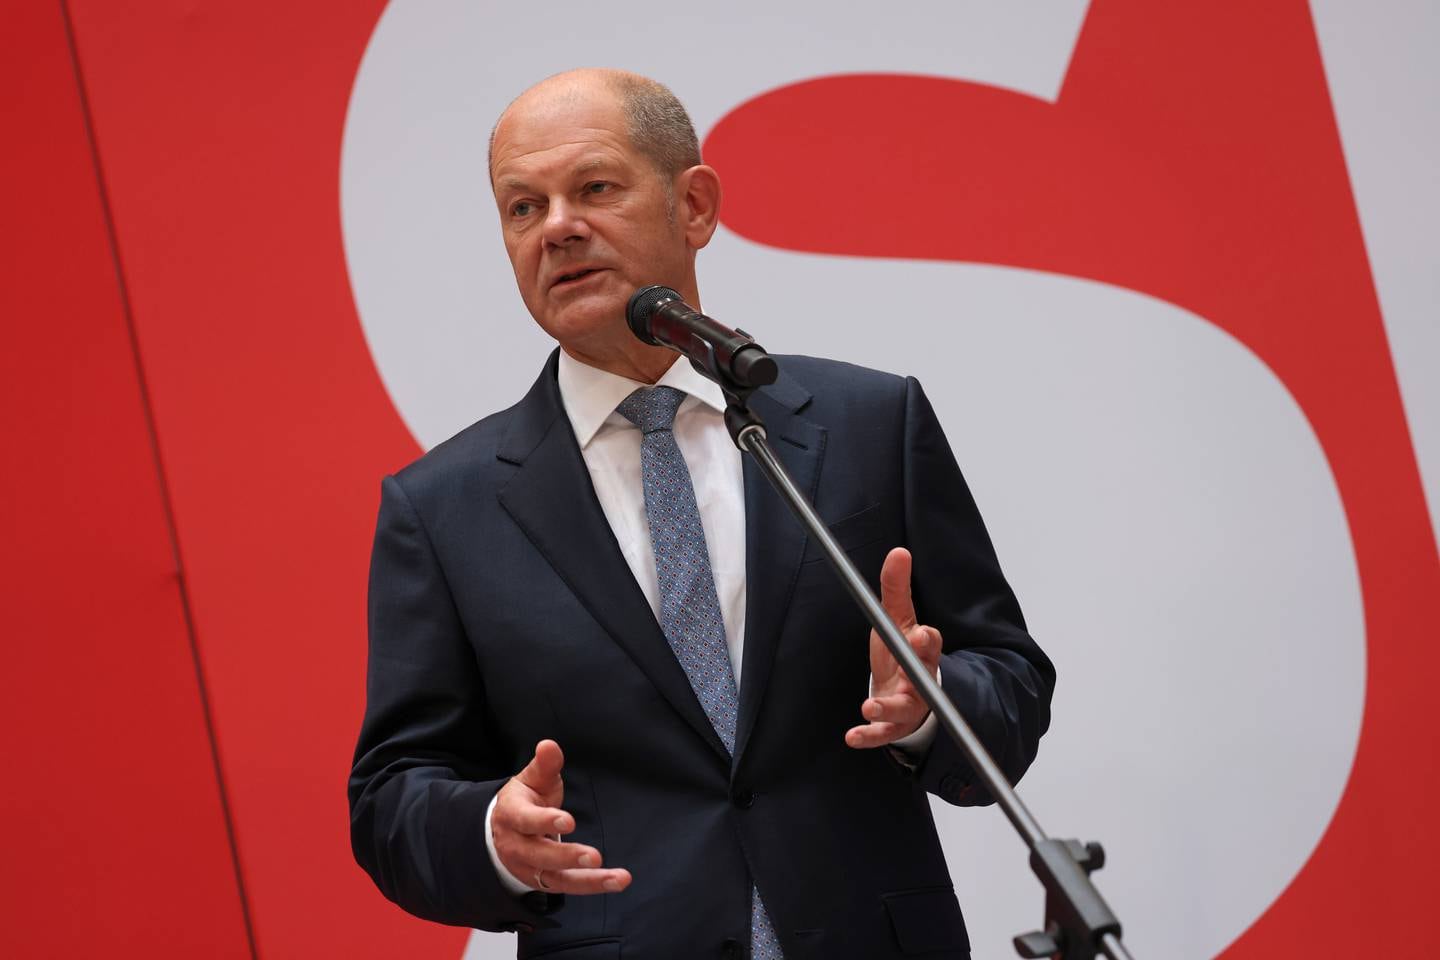 Olaf Scholz, who is well placed to be Germany's next chancellor, addressed Britain's supply problems on Monday. Getty